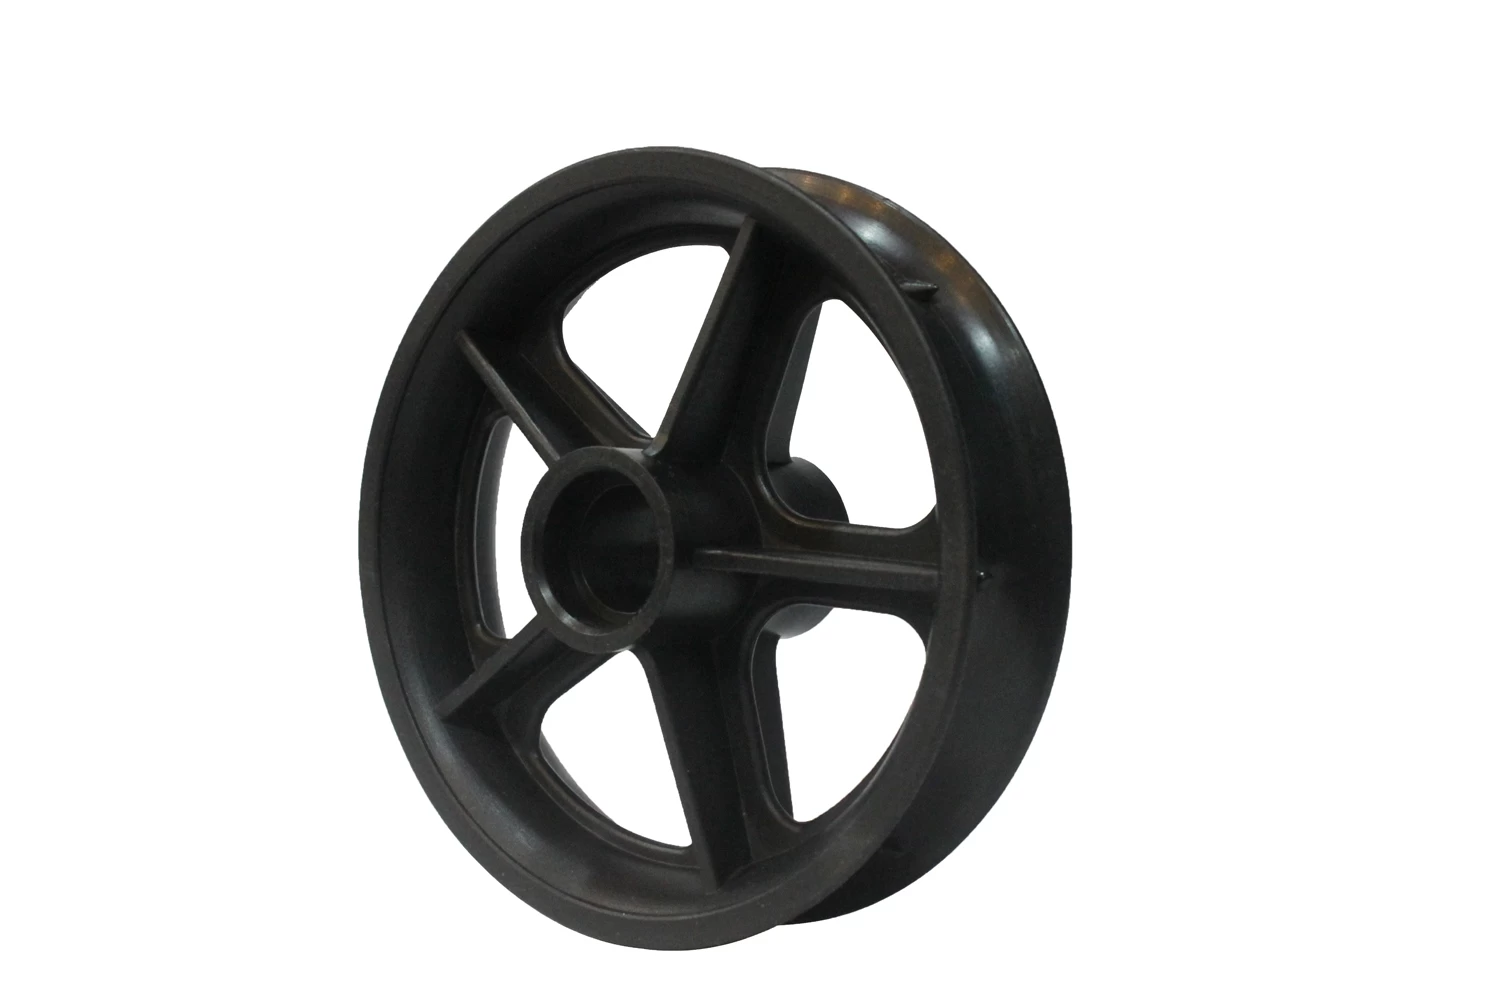 China whole flat free solid wheel,Solid Tires,pu foam tire,polyurethane tire fill fabricante